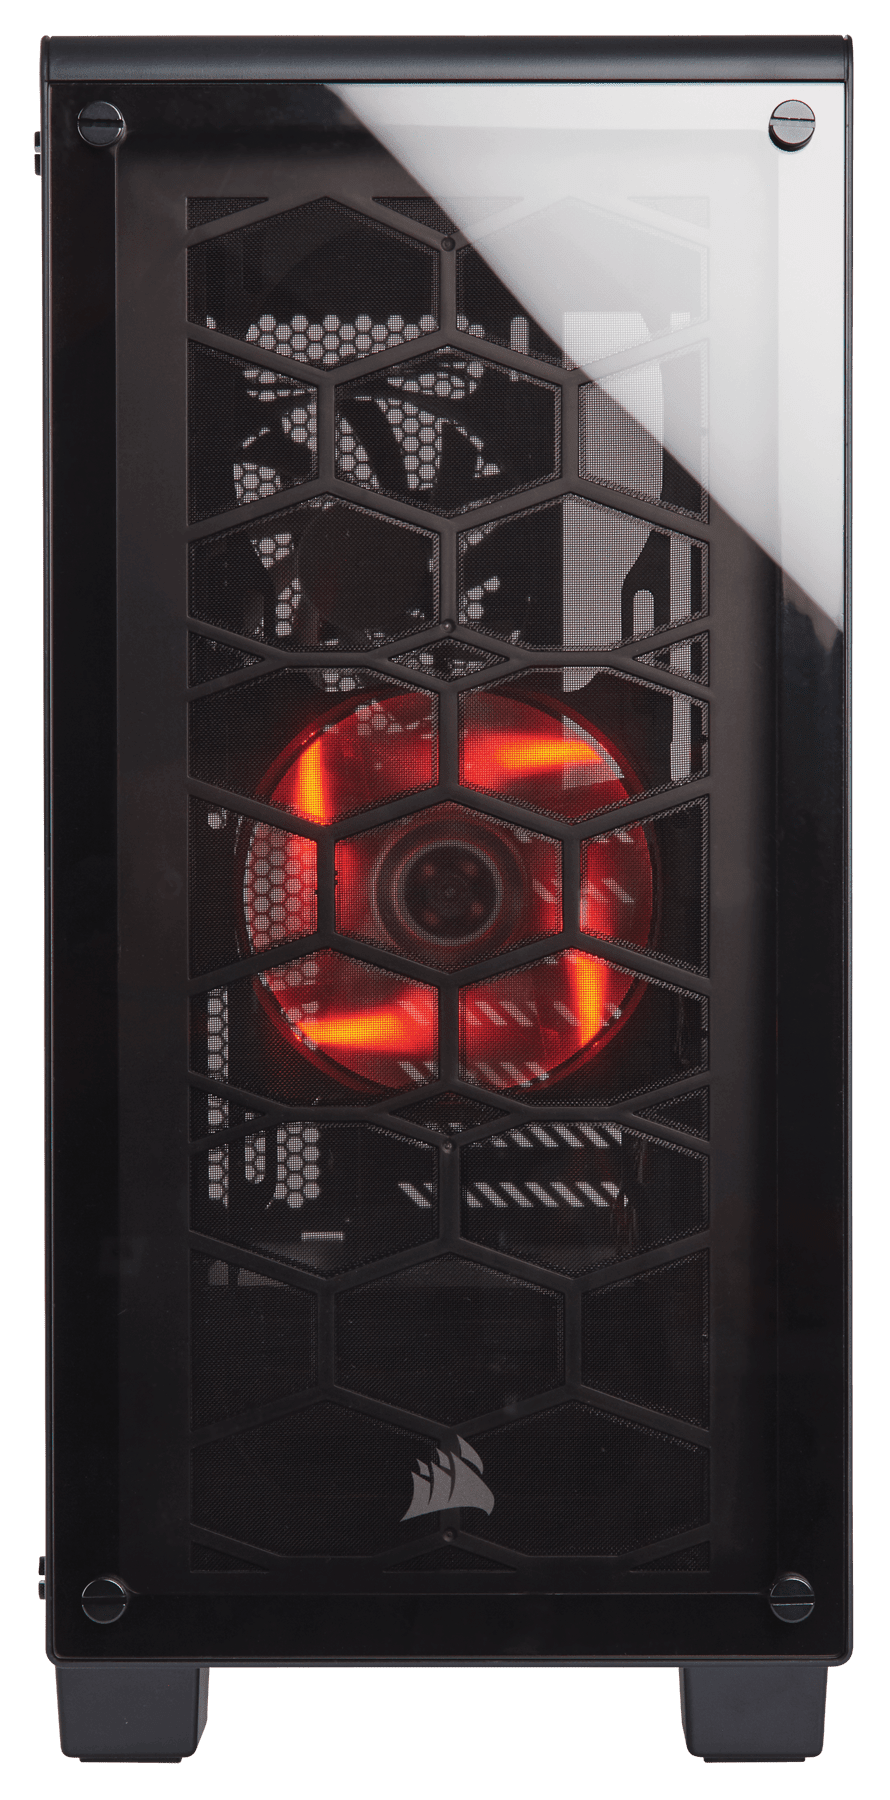 Crystal Series™ 460X ATX Mid-Tower Case